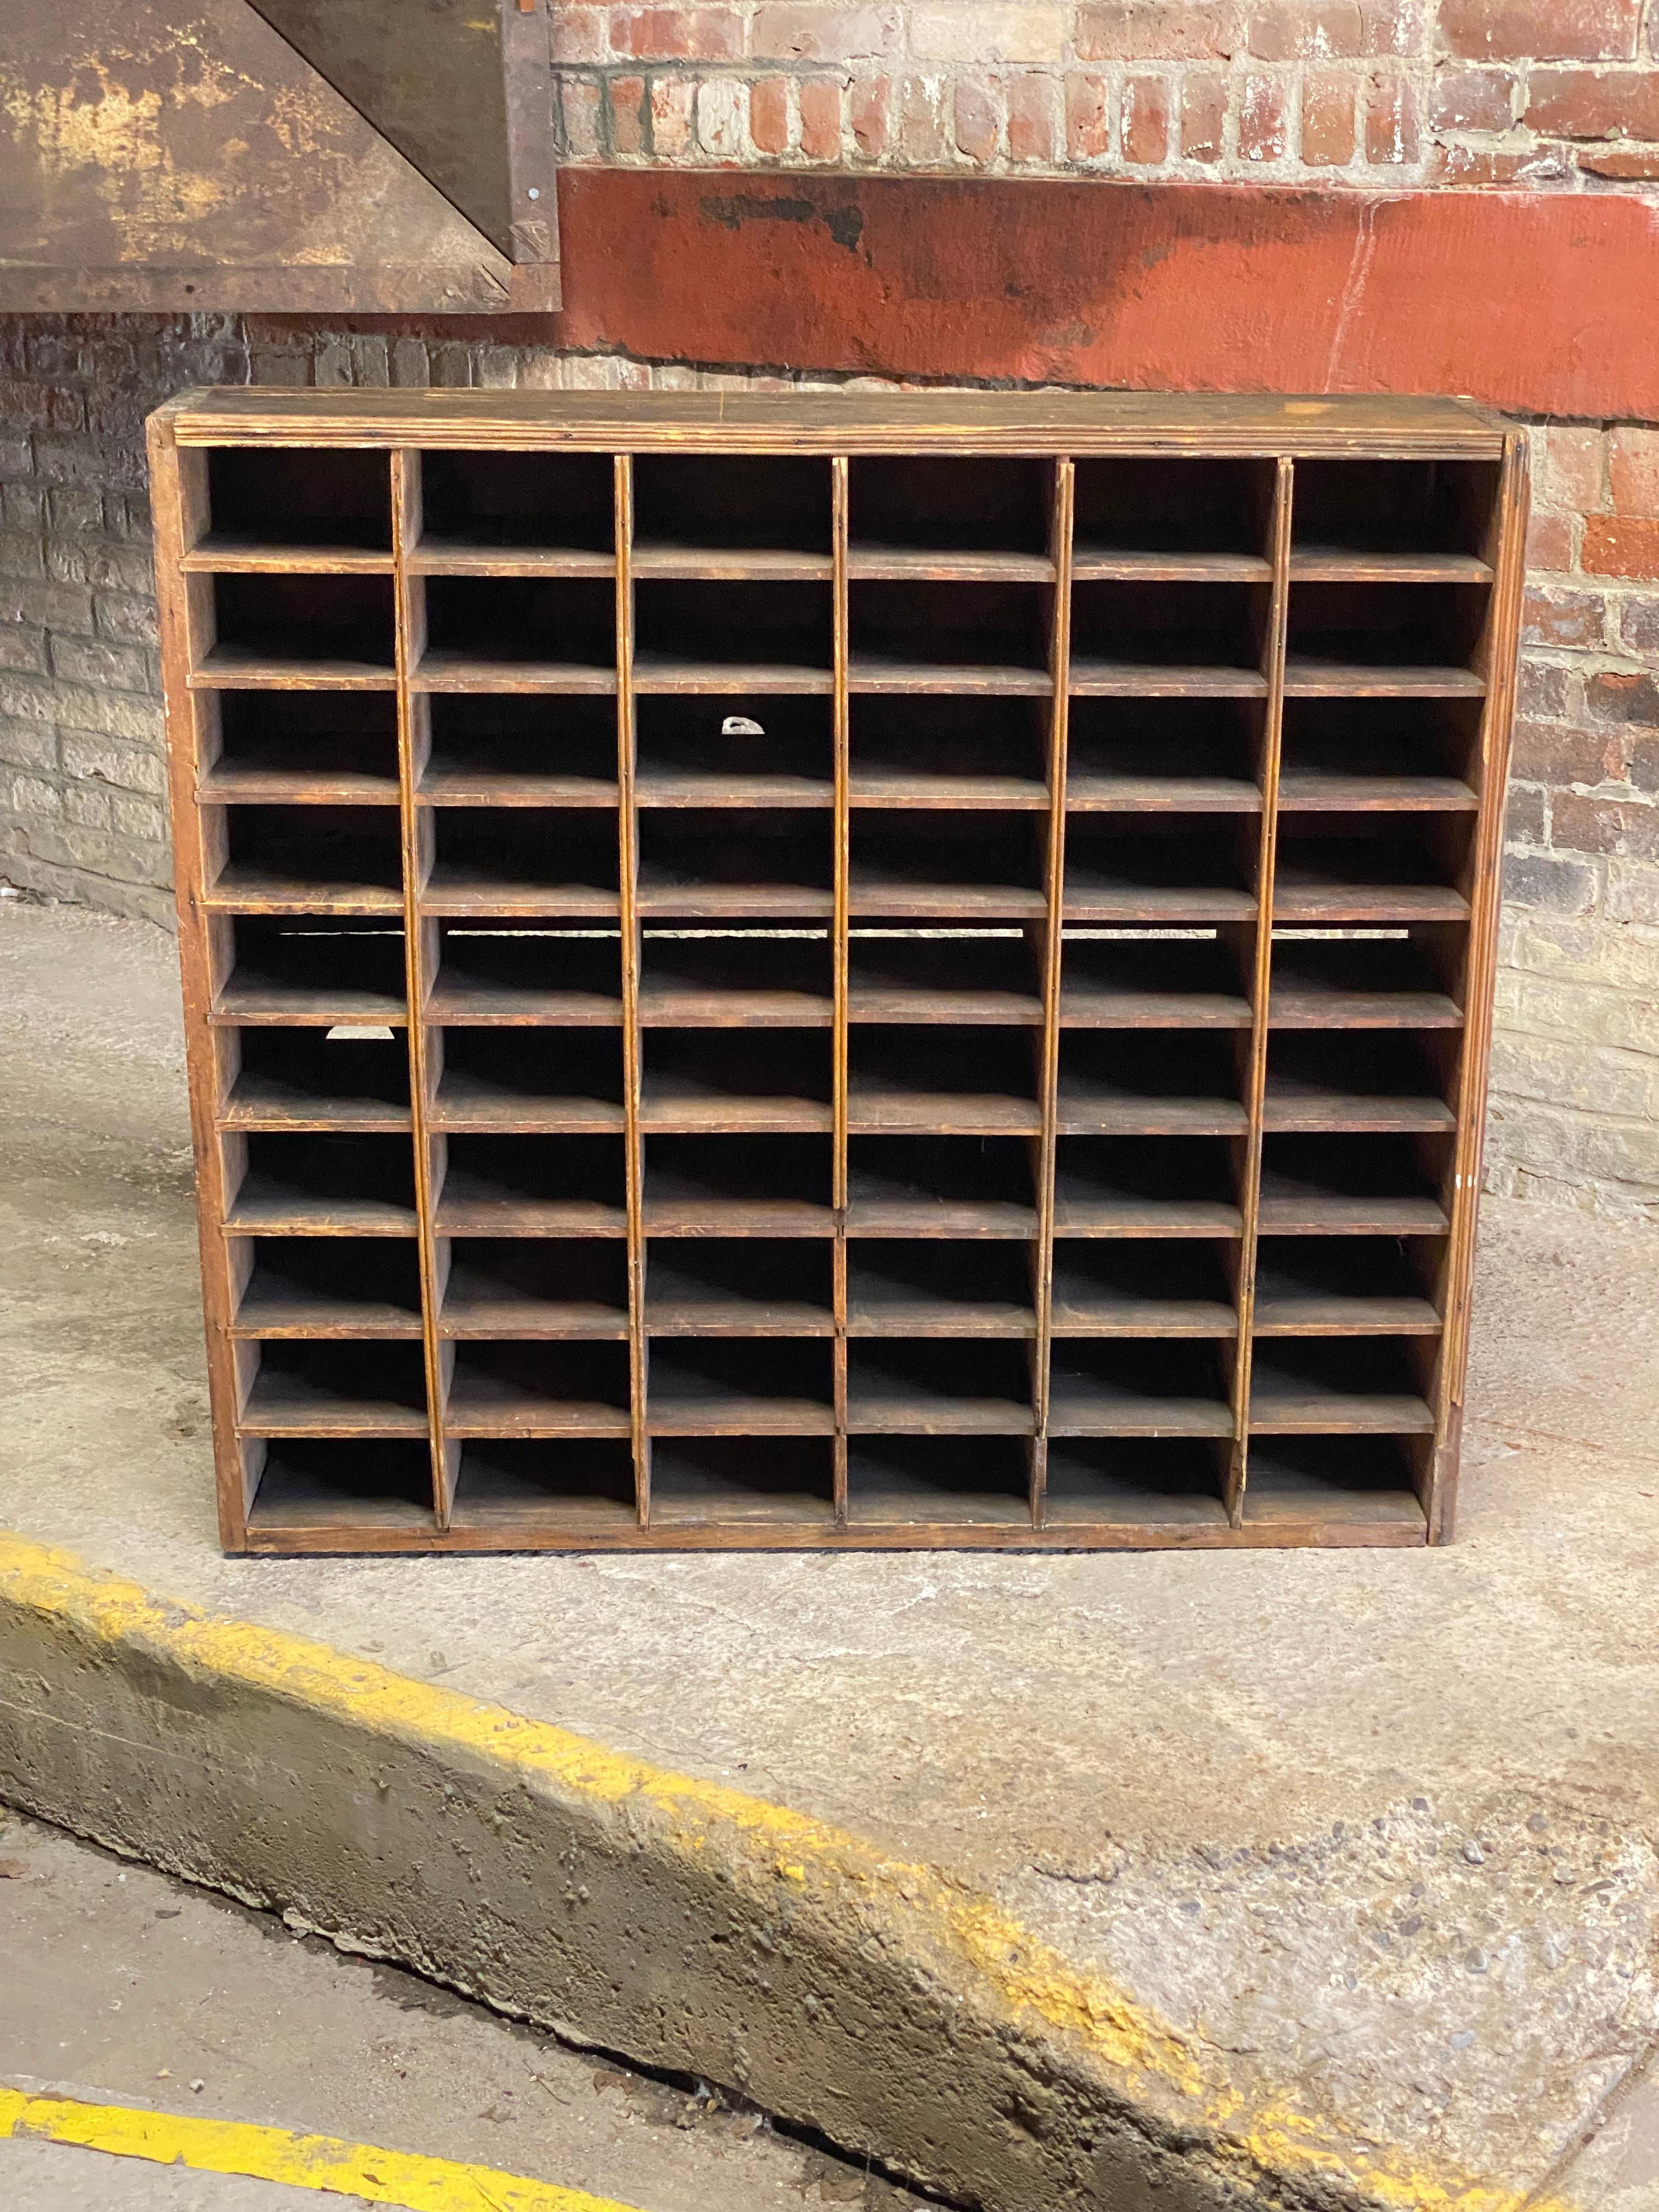 Sixty pine cubby hole slots. Multiple uses and possibilities for the home or business. Could possibly be used horizontally or vertically, but was initially used horizontally. 

Good durable condition. Nicely distressed due to use and weathering.